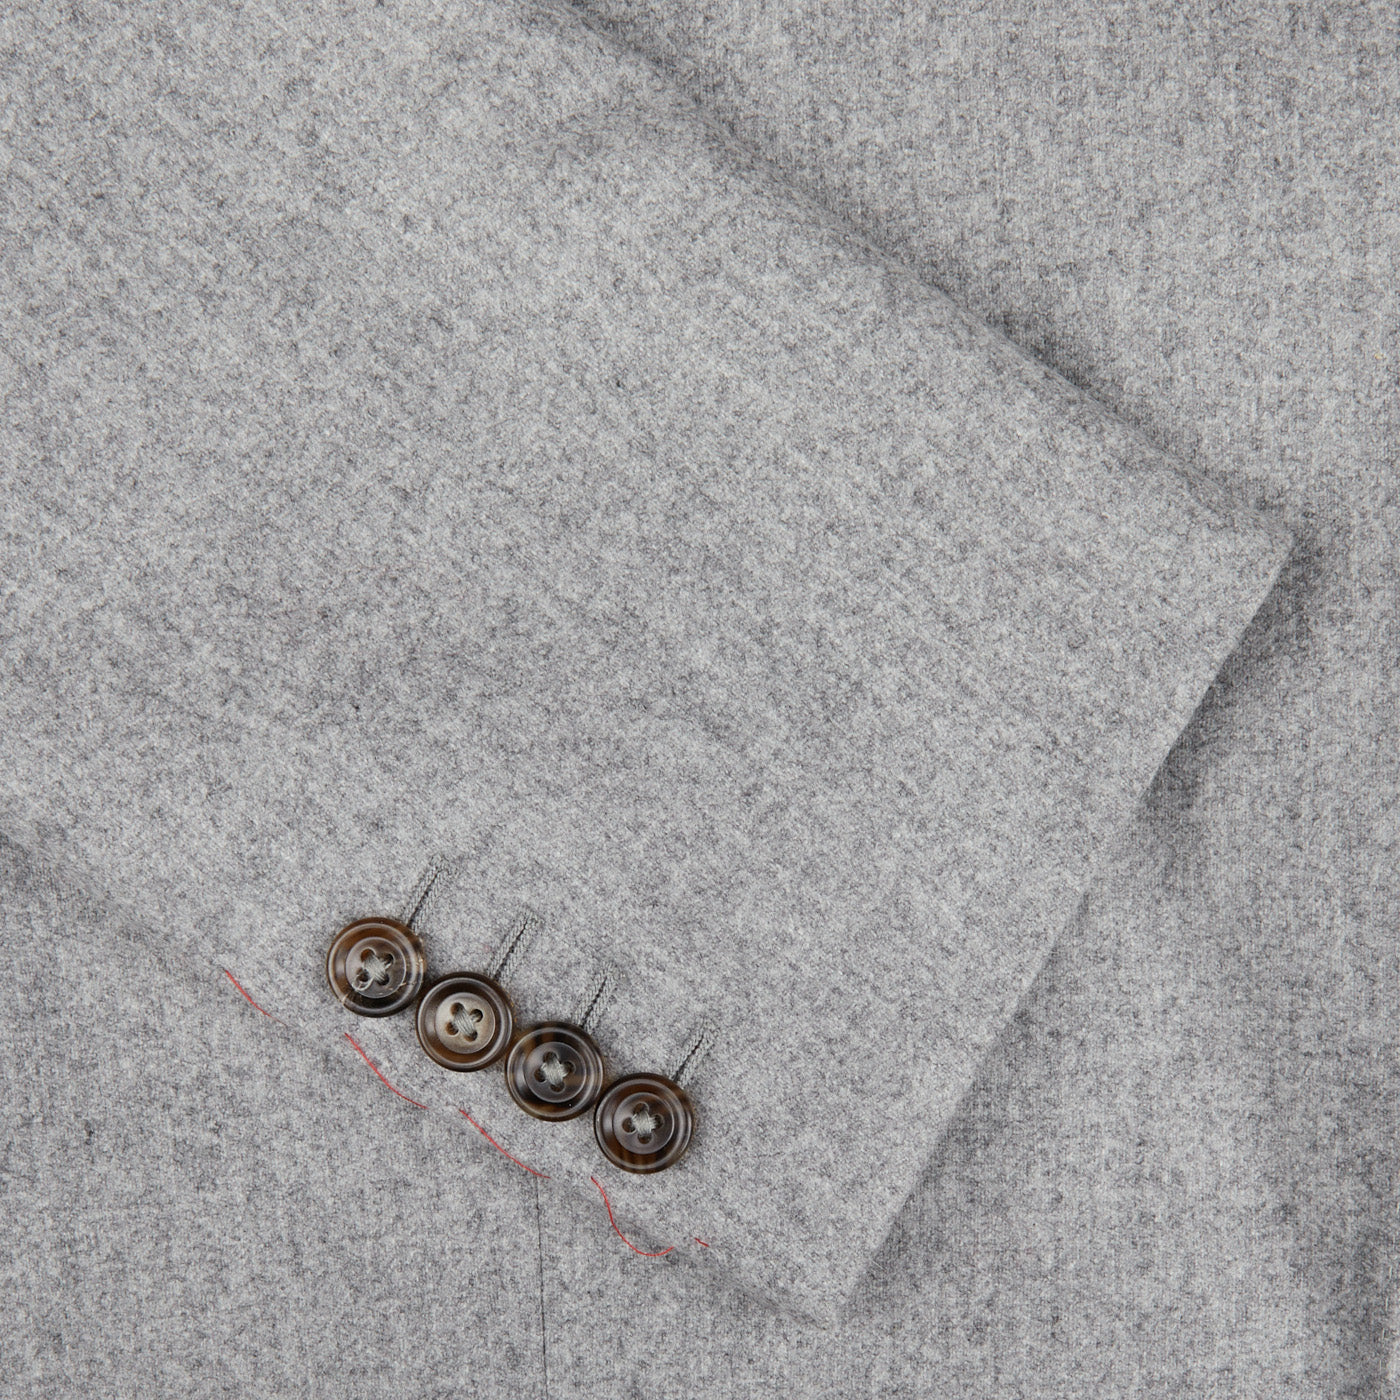 A close up of a Light Grey VBC Wool Flannel Signature Jacket with buttons made in Italy from pure wool flannel by Alexander Kraft Monte Carlo.